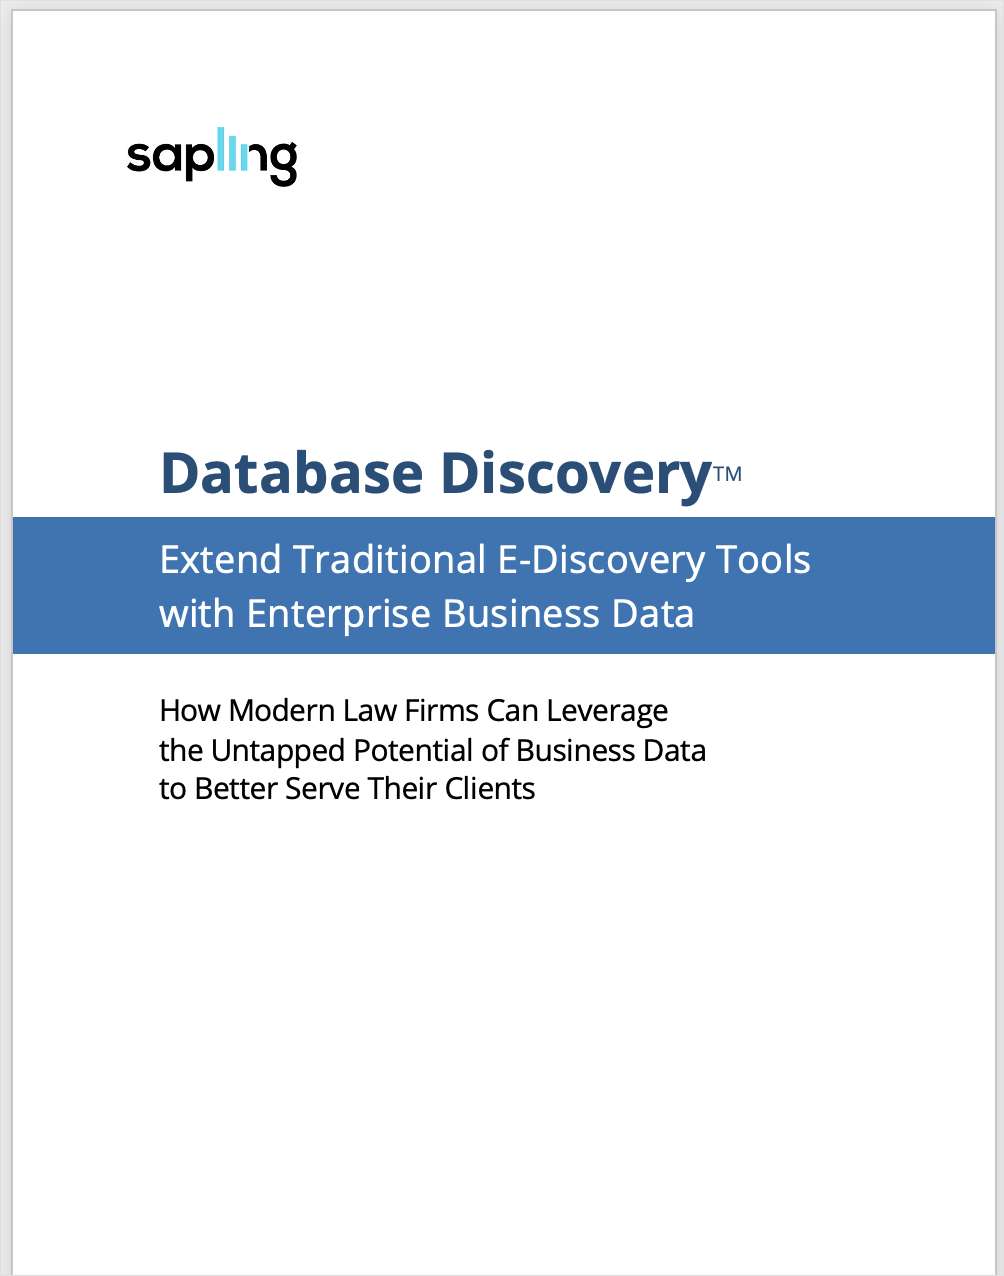 Database Discovery: Extend Traditional E-Discovery Tools with Enterprise Business Data